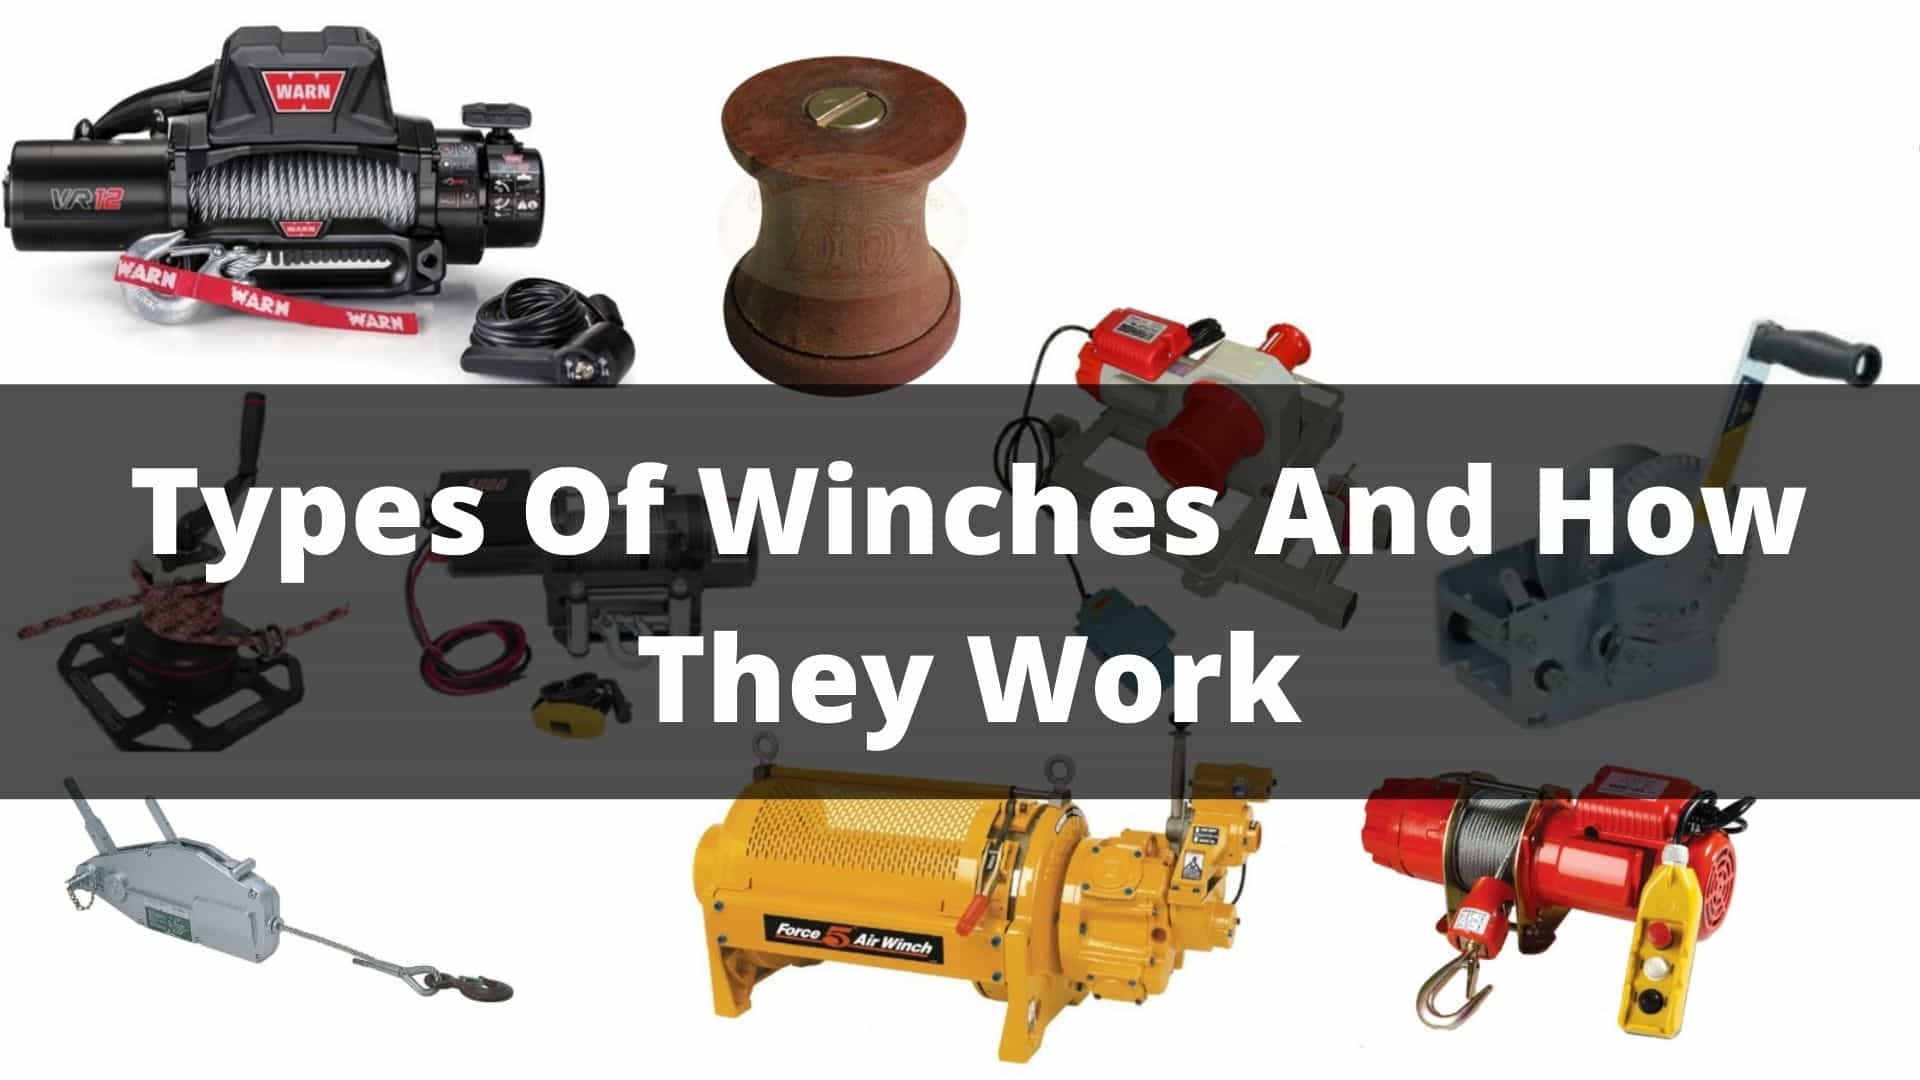 Types-Of-Winches-And-How-They-Work-min